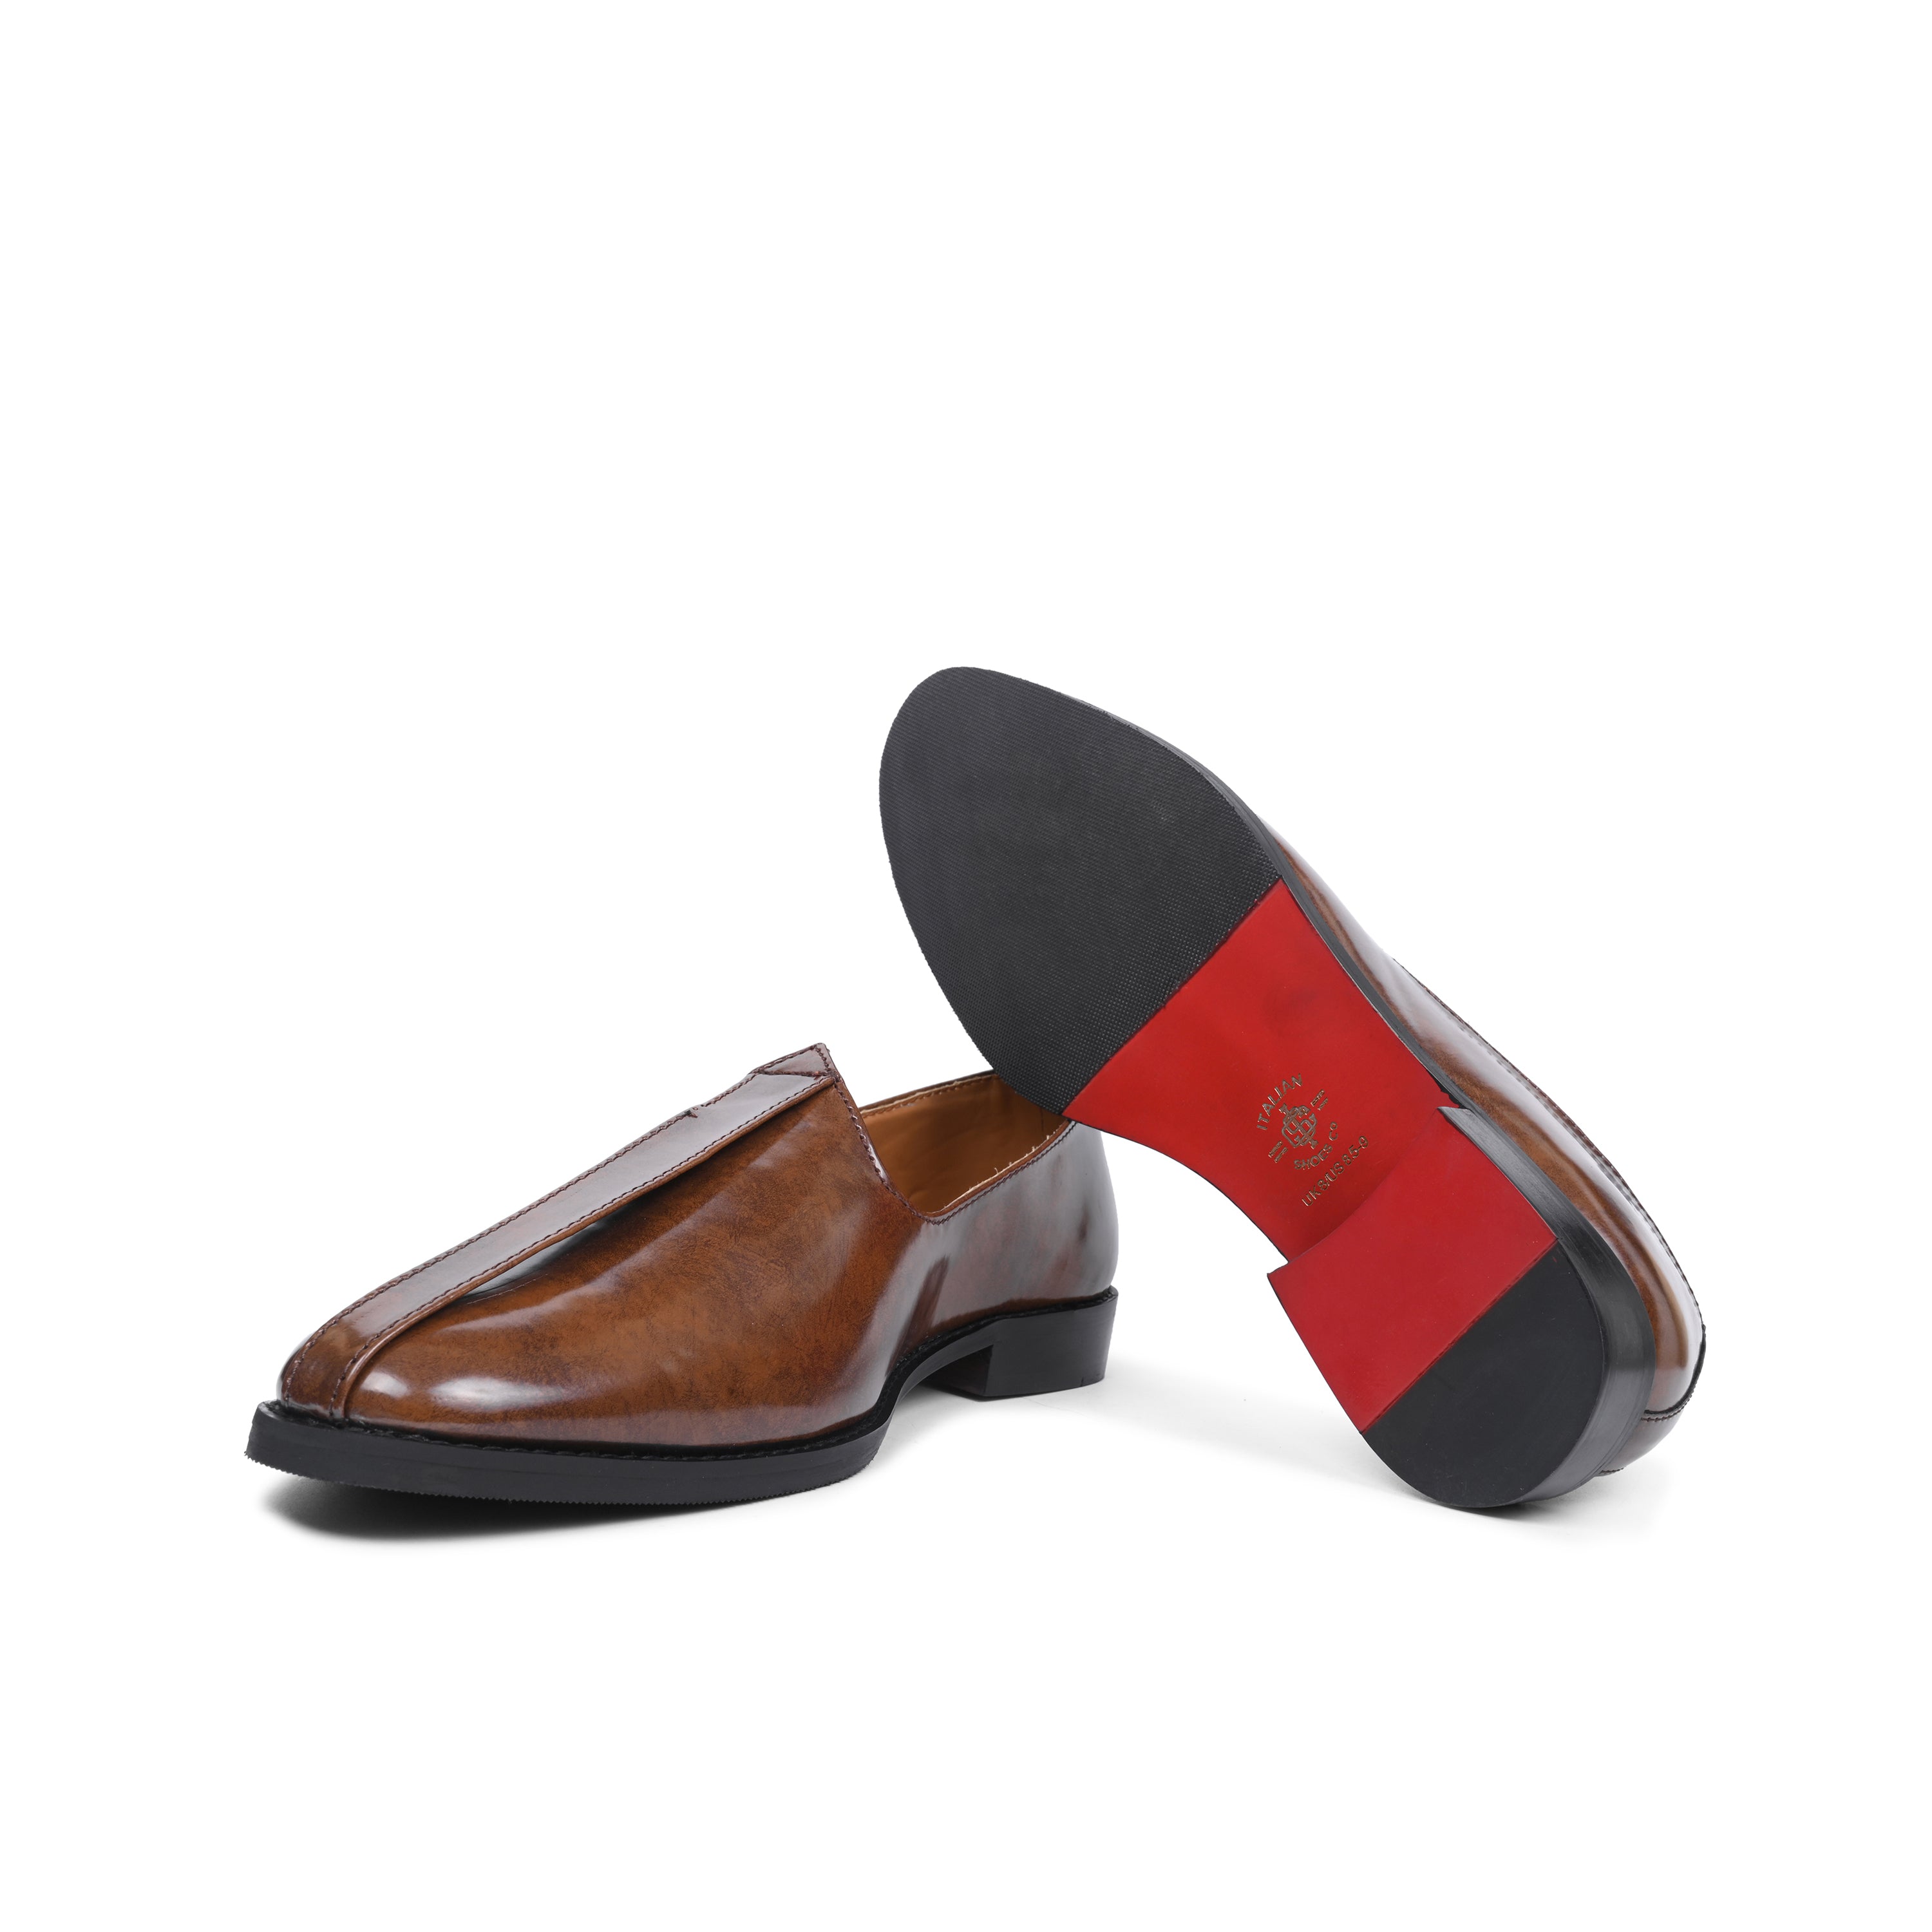 Gayle Grant Loafers